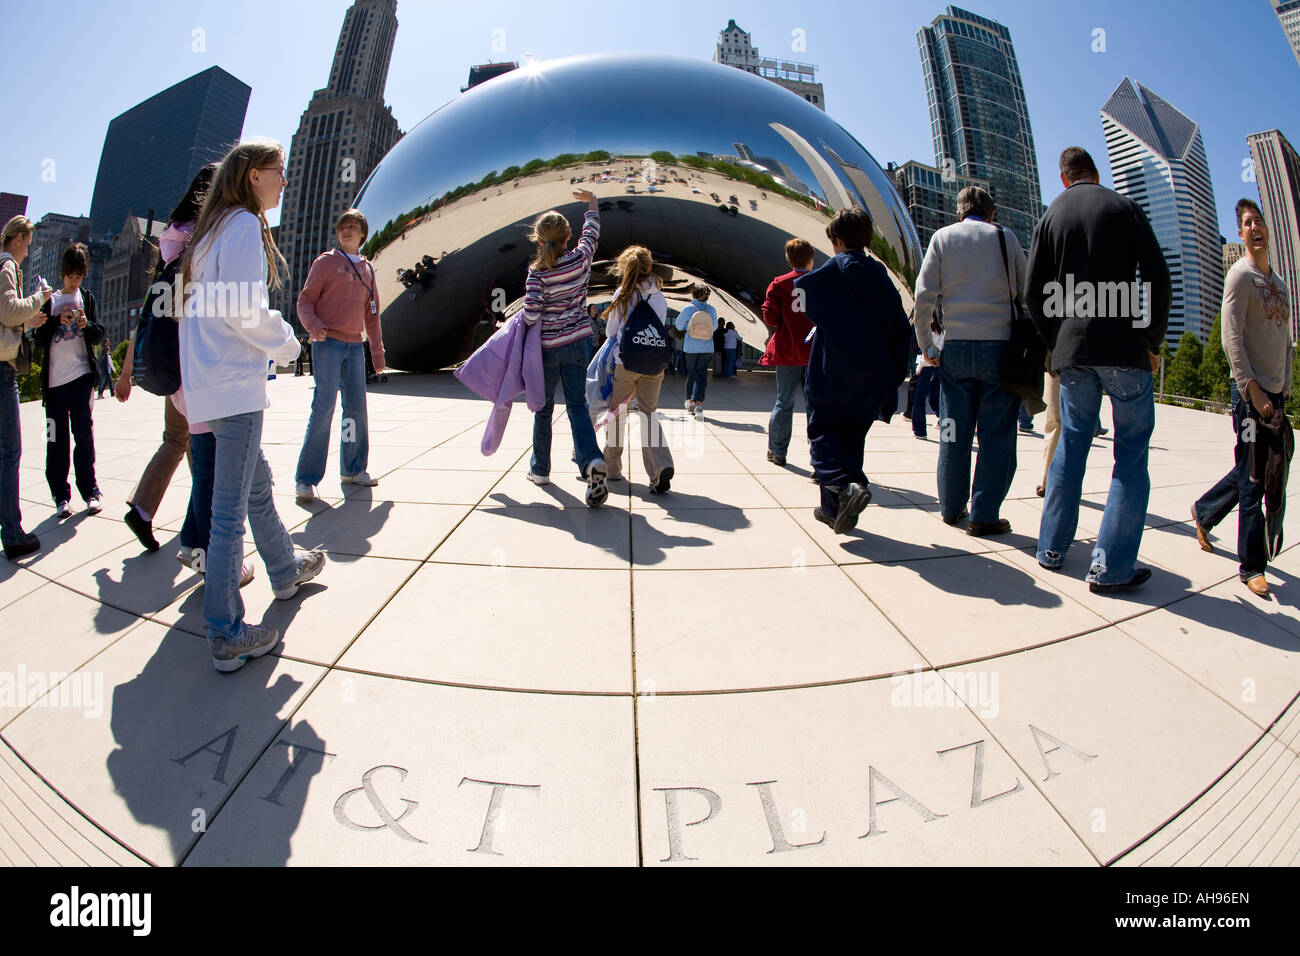 ILLINOIS Chicago AT T Plaza etched in stone near Bean sculpture plaza at Millennium Park students on trip Stock Photo